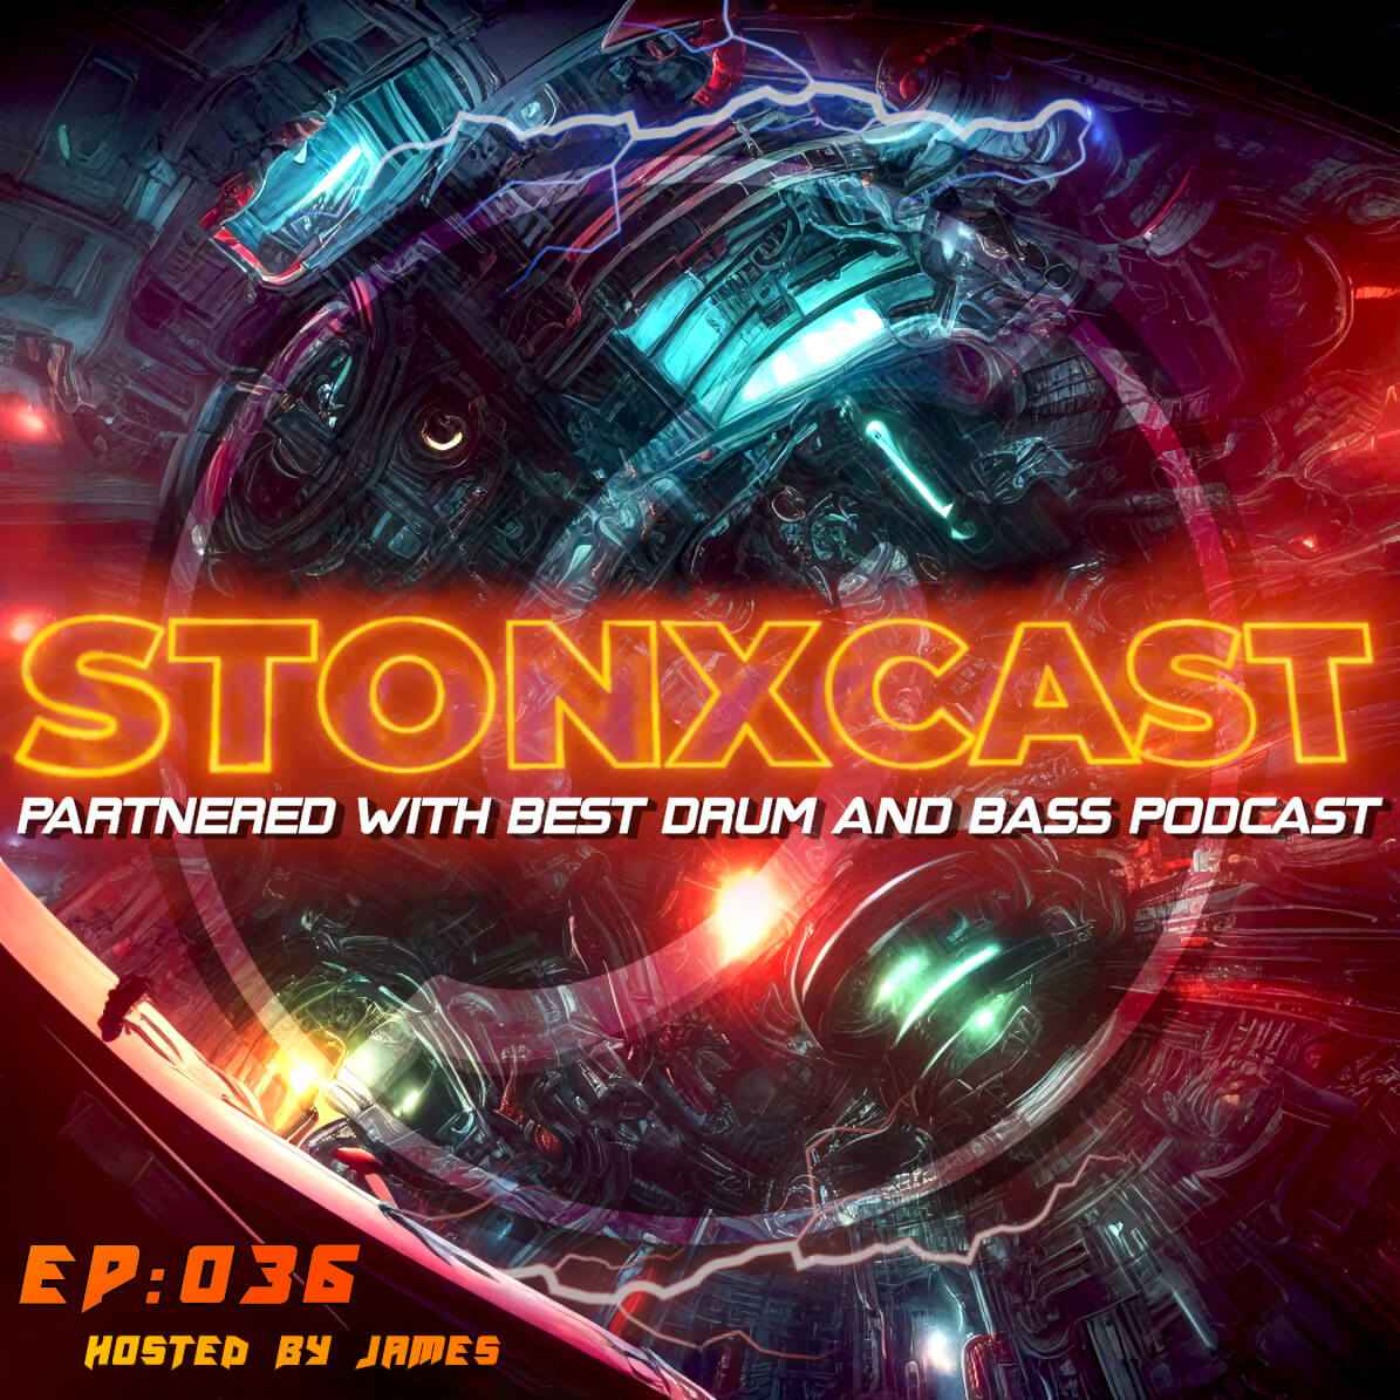  Stonxcast EP:036 - Hosted by James Artwork